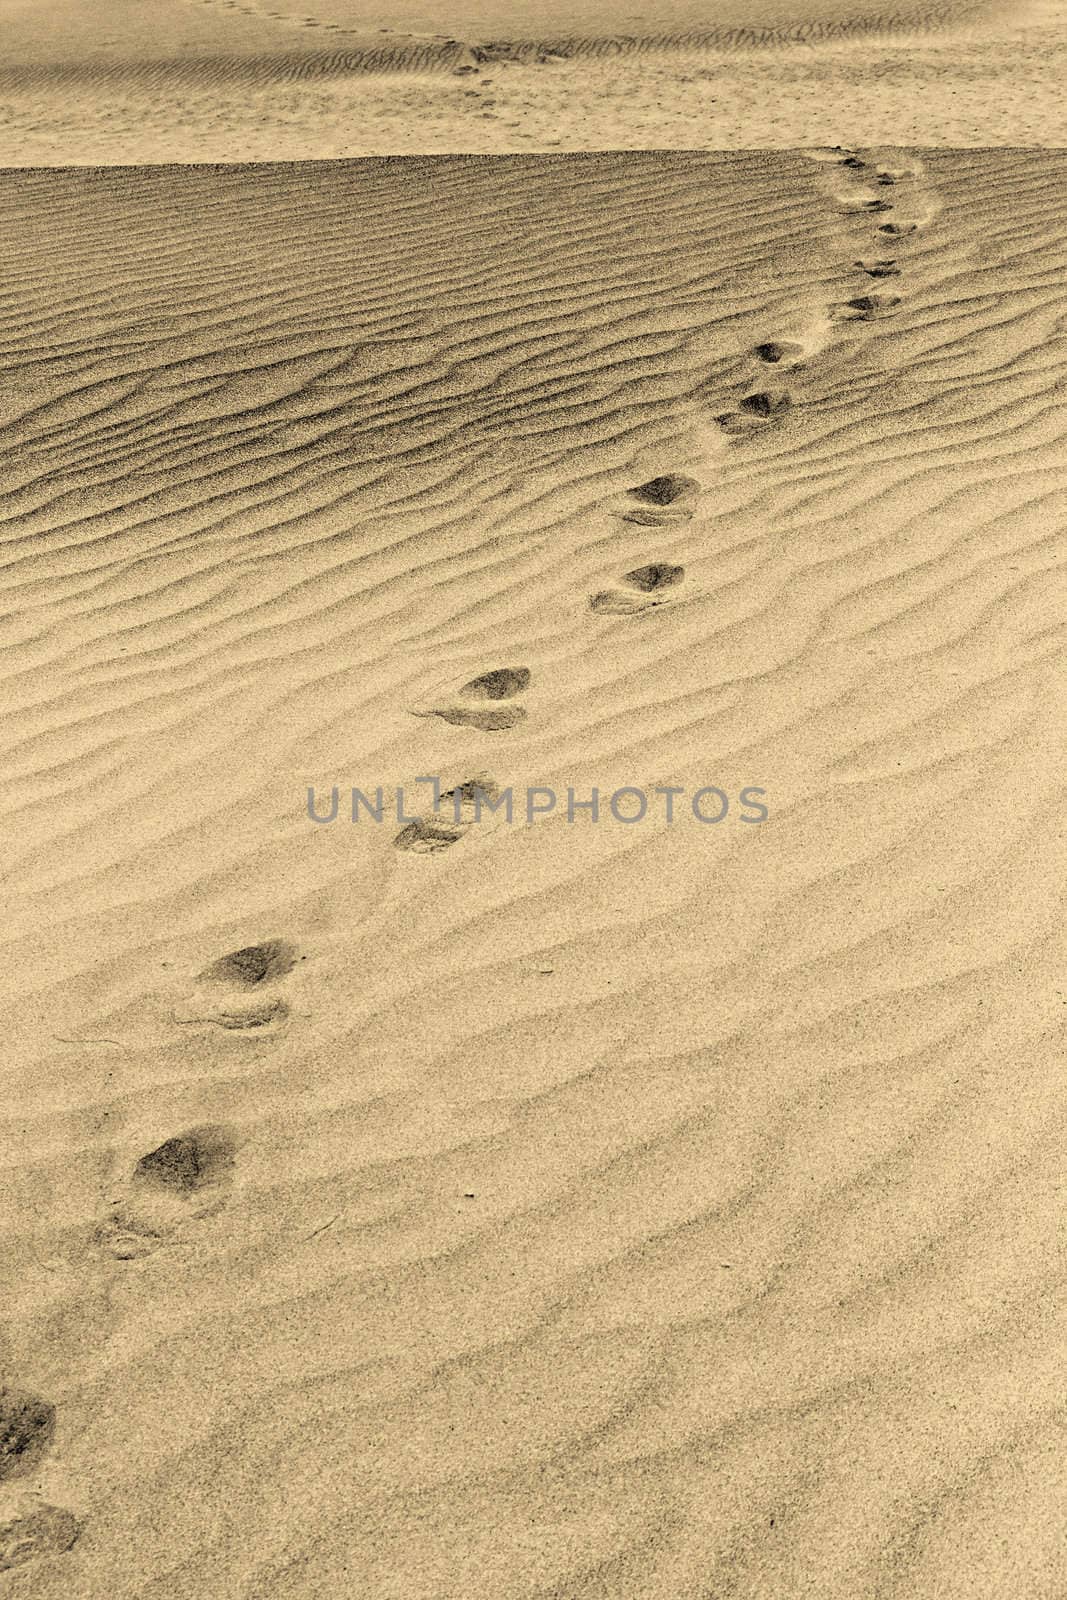 black and white marks on the sand  by Plus69